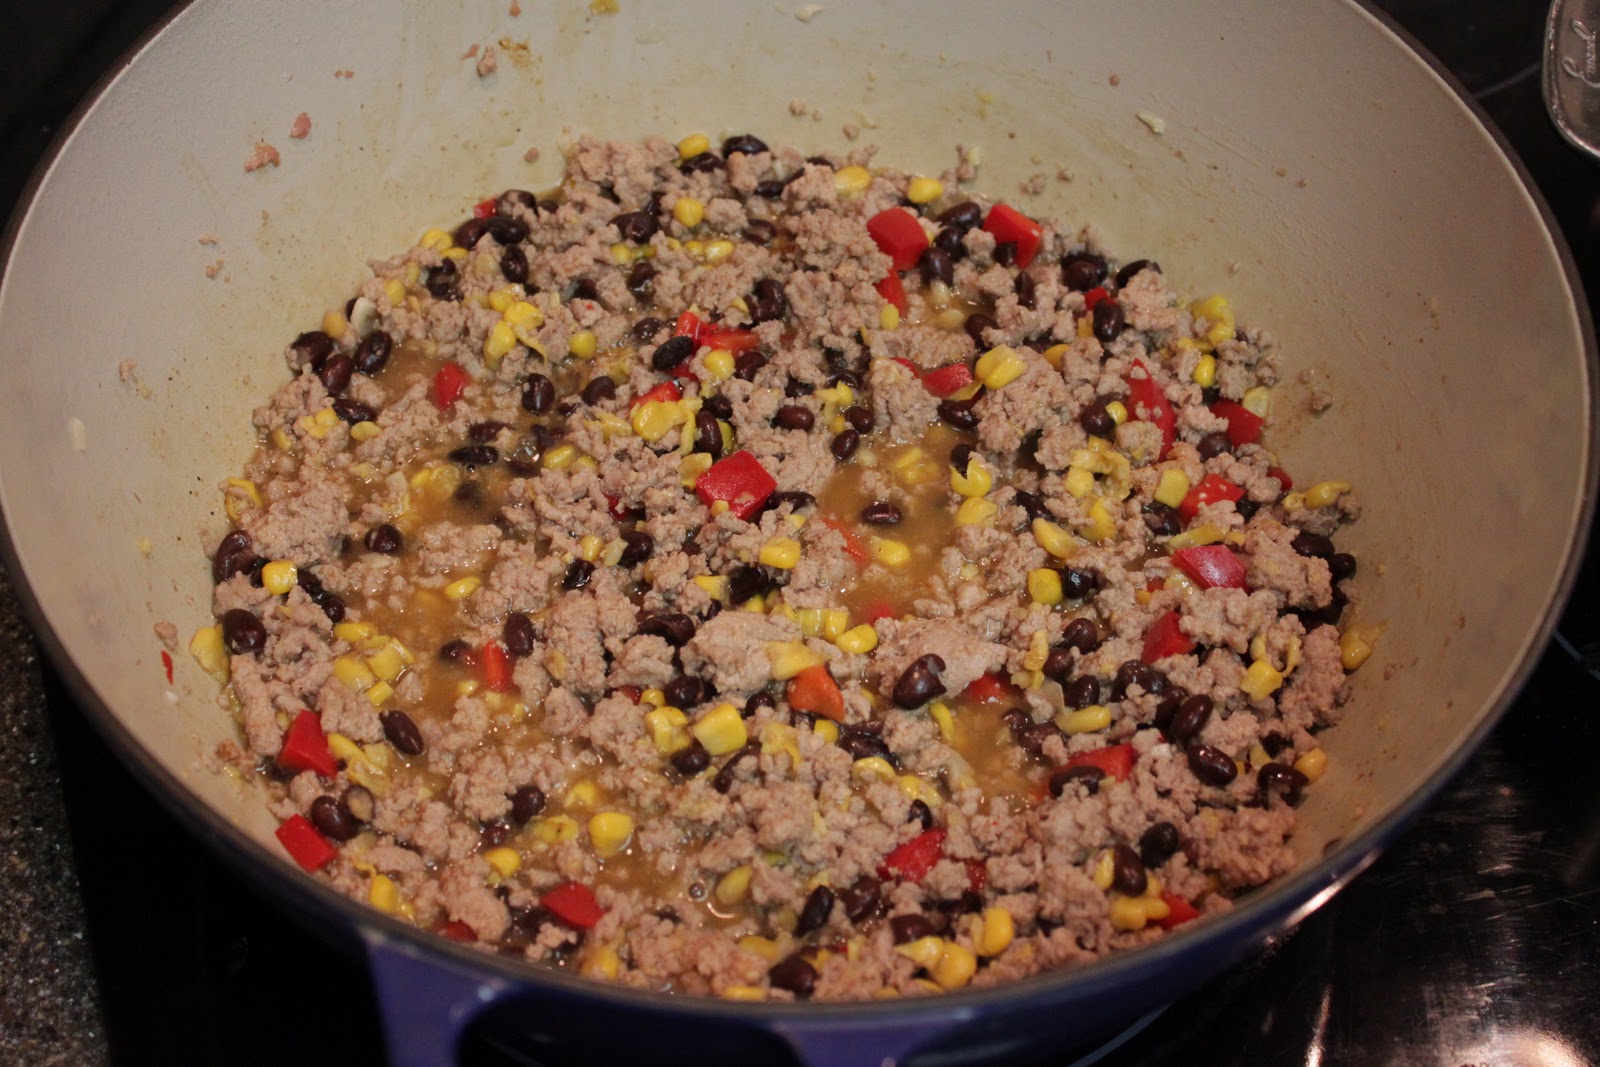 Wholesome Dinner Tonight: Tamale Pie with Turkey, Black Beans and Corn ...